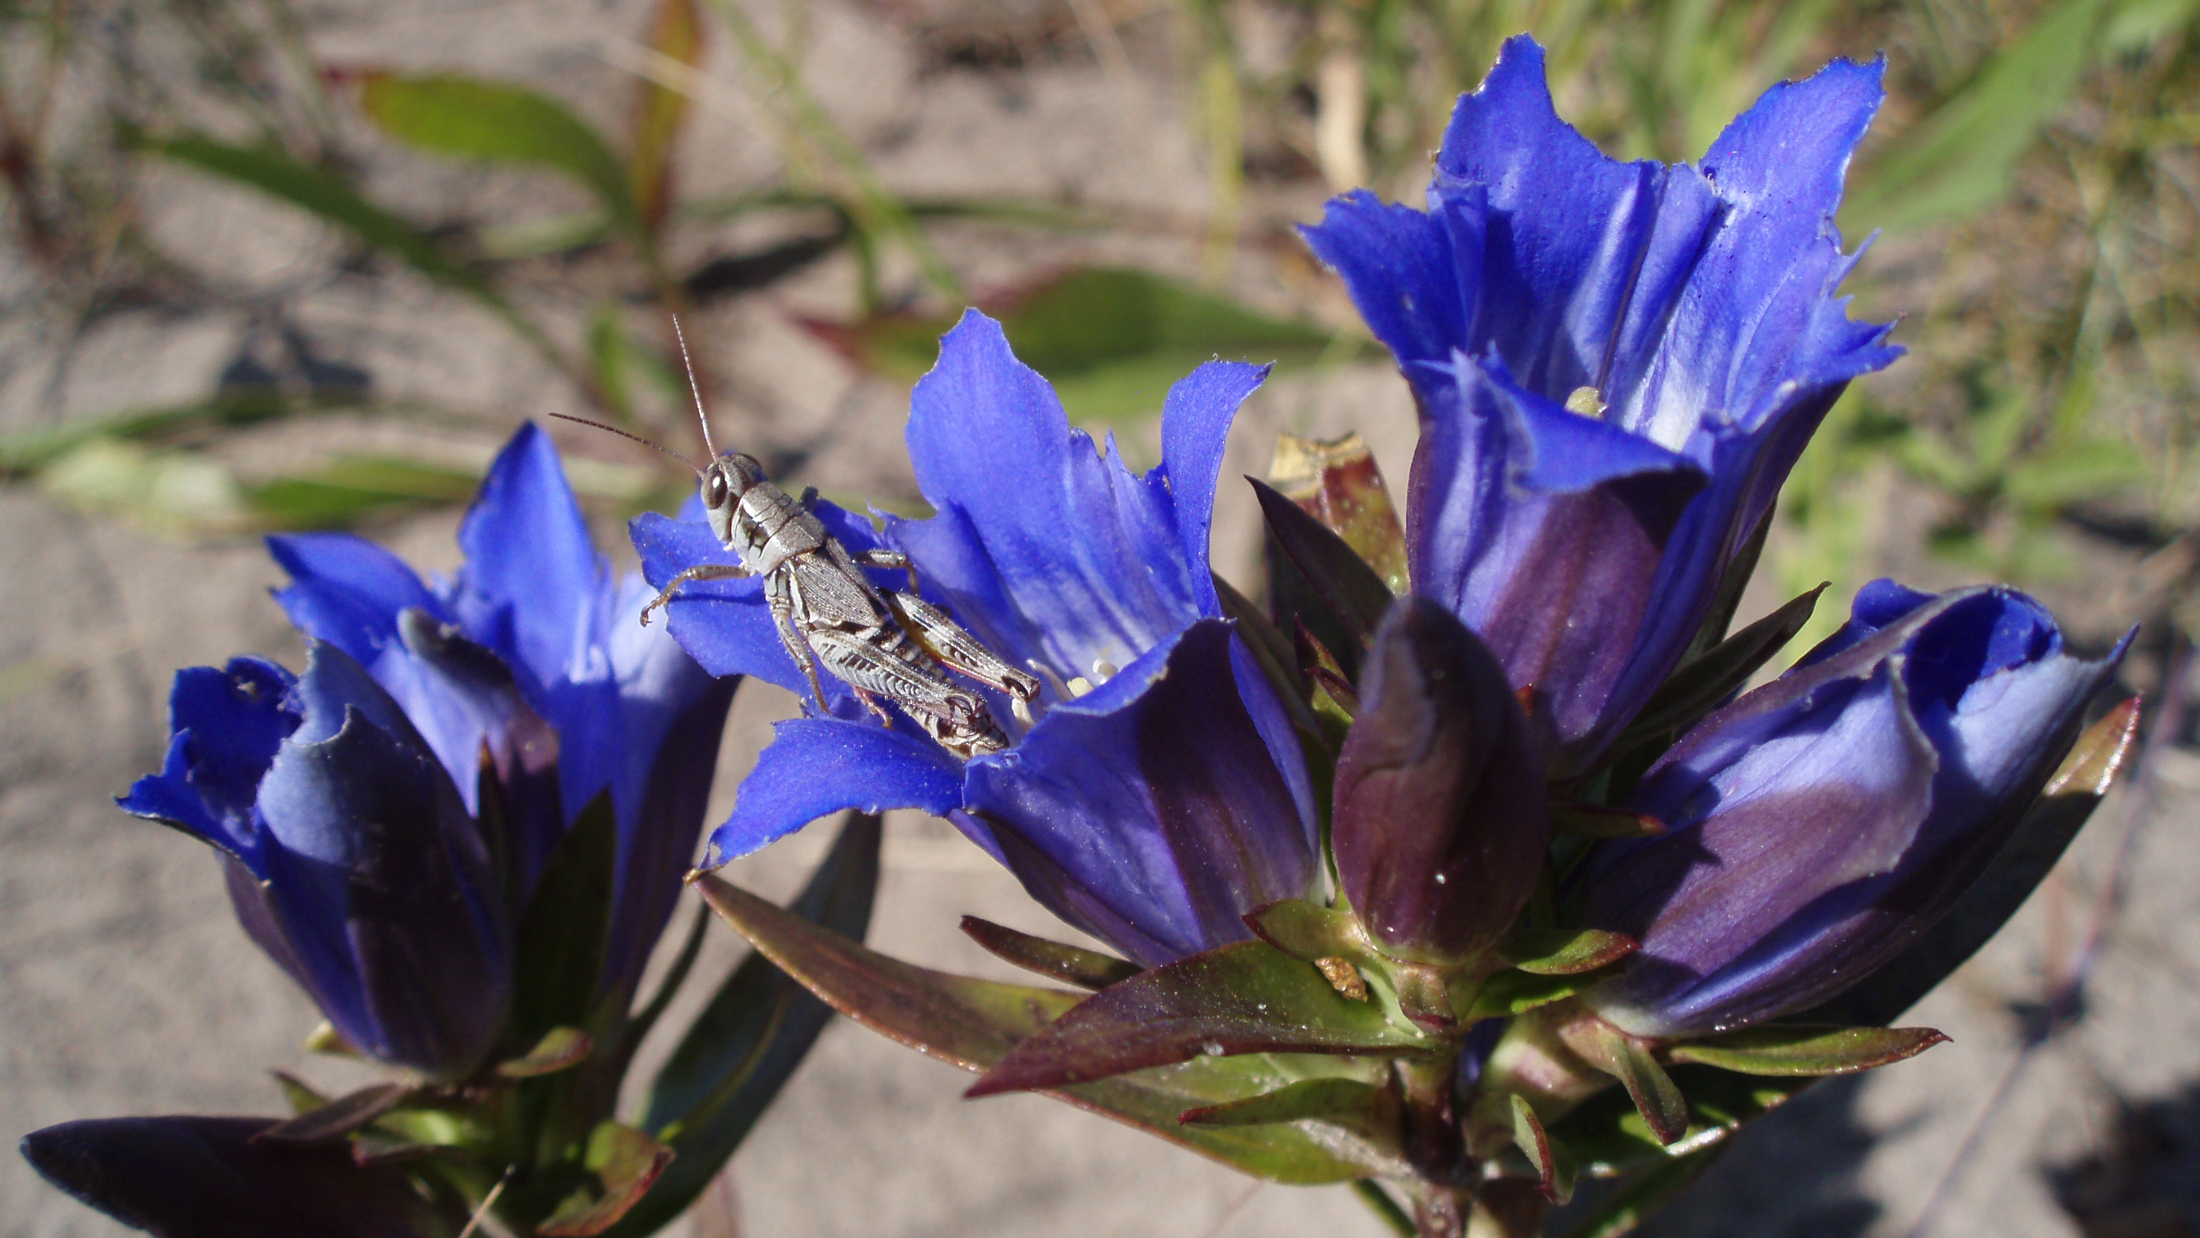 Grasshopper on a downy gentian, another species with limited distribution in the Tallgrass Aspen Parklands. Photo © Jonathan Eerkes